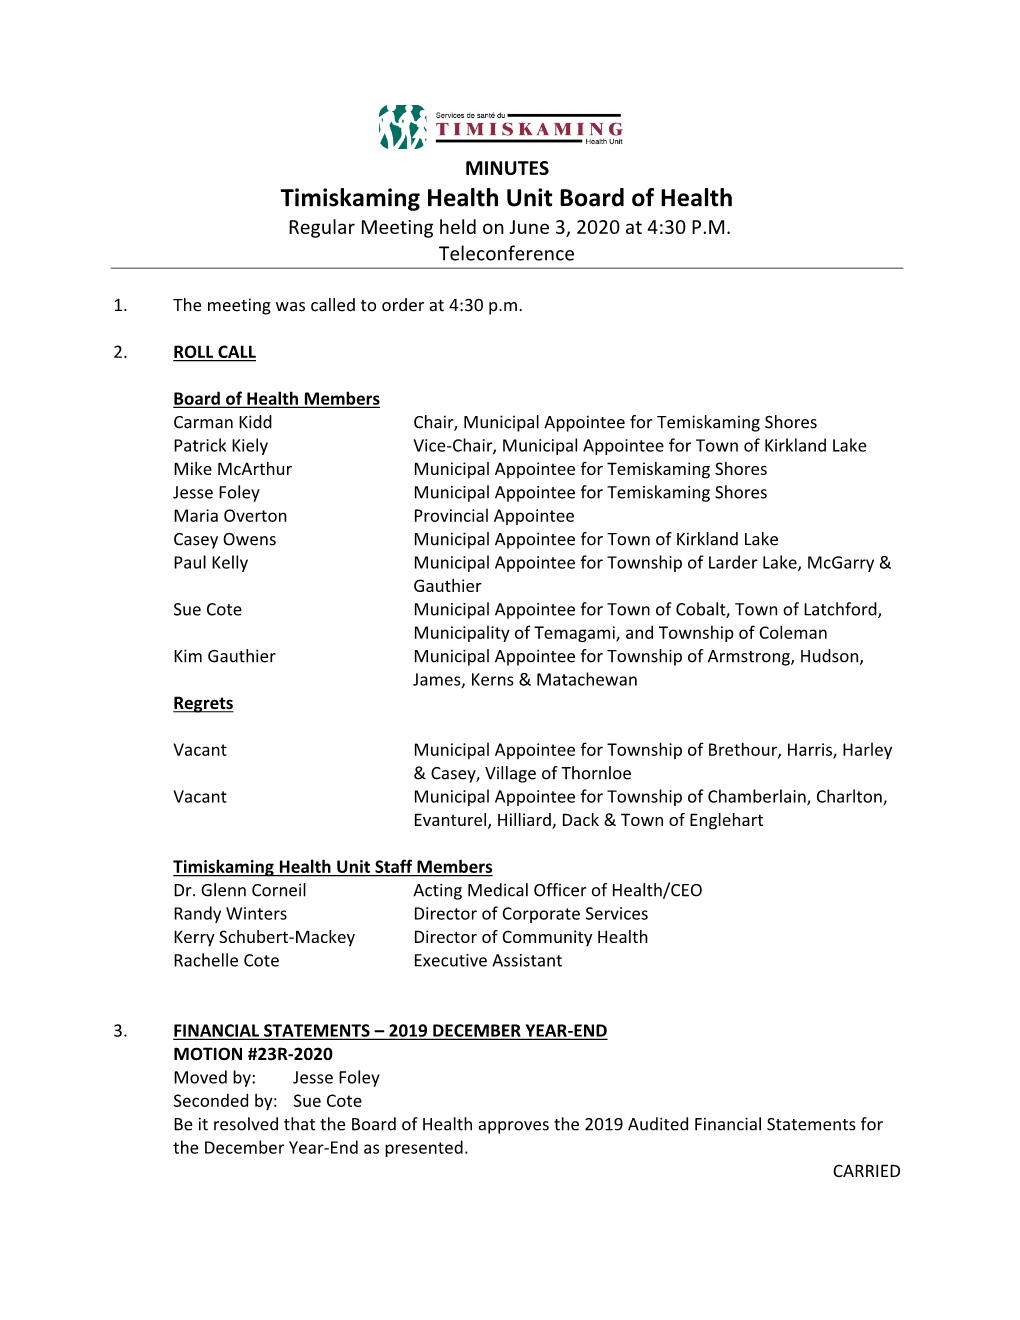 Board of Health Minutes